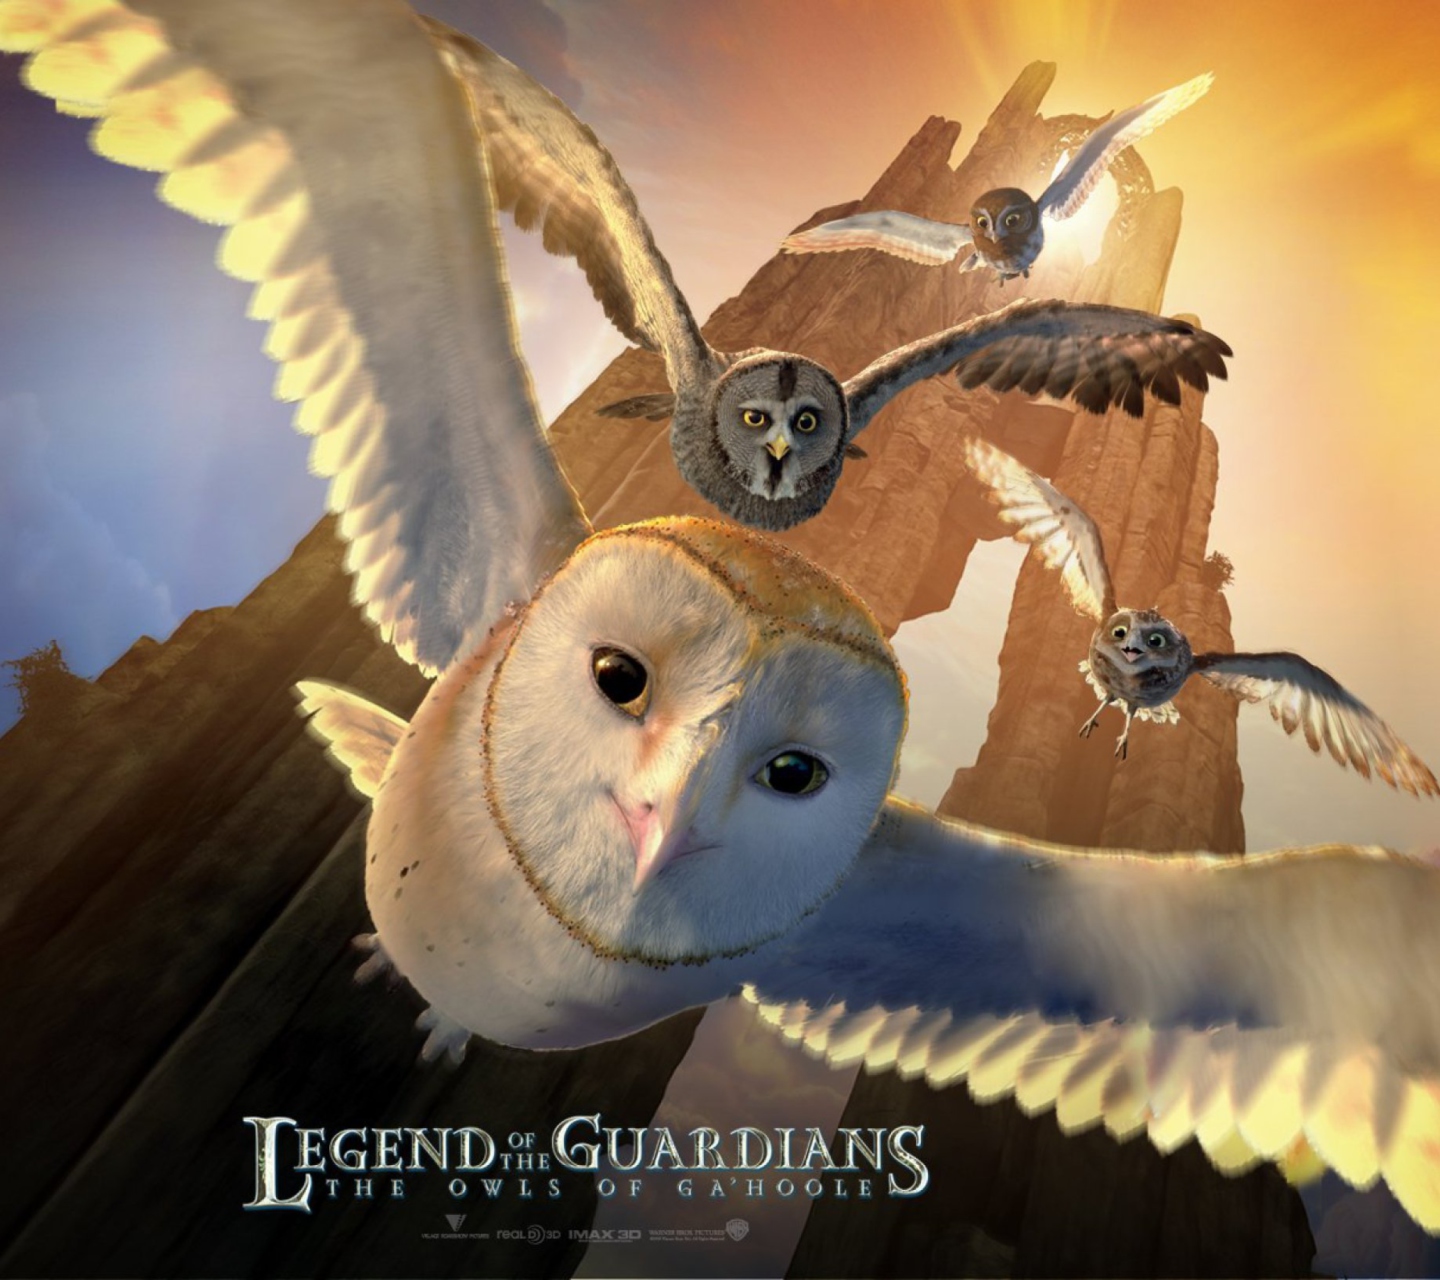 Legend of the Guardians: The Owls of Ga'Hoole wallpaper 1440x1280